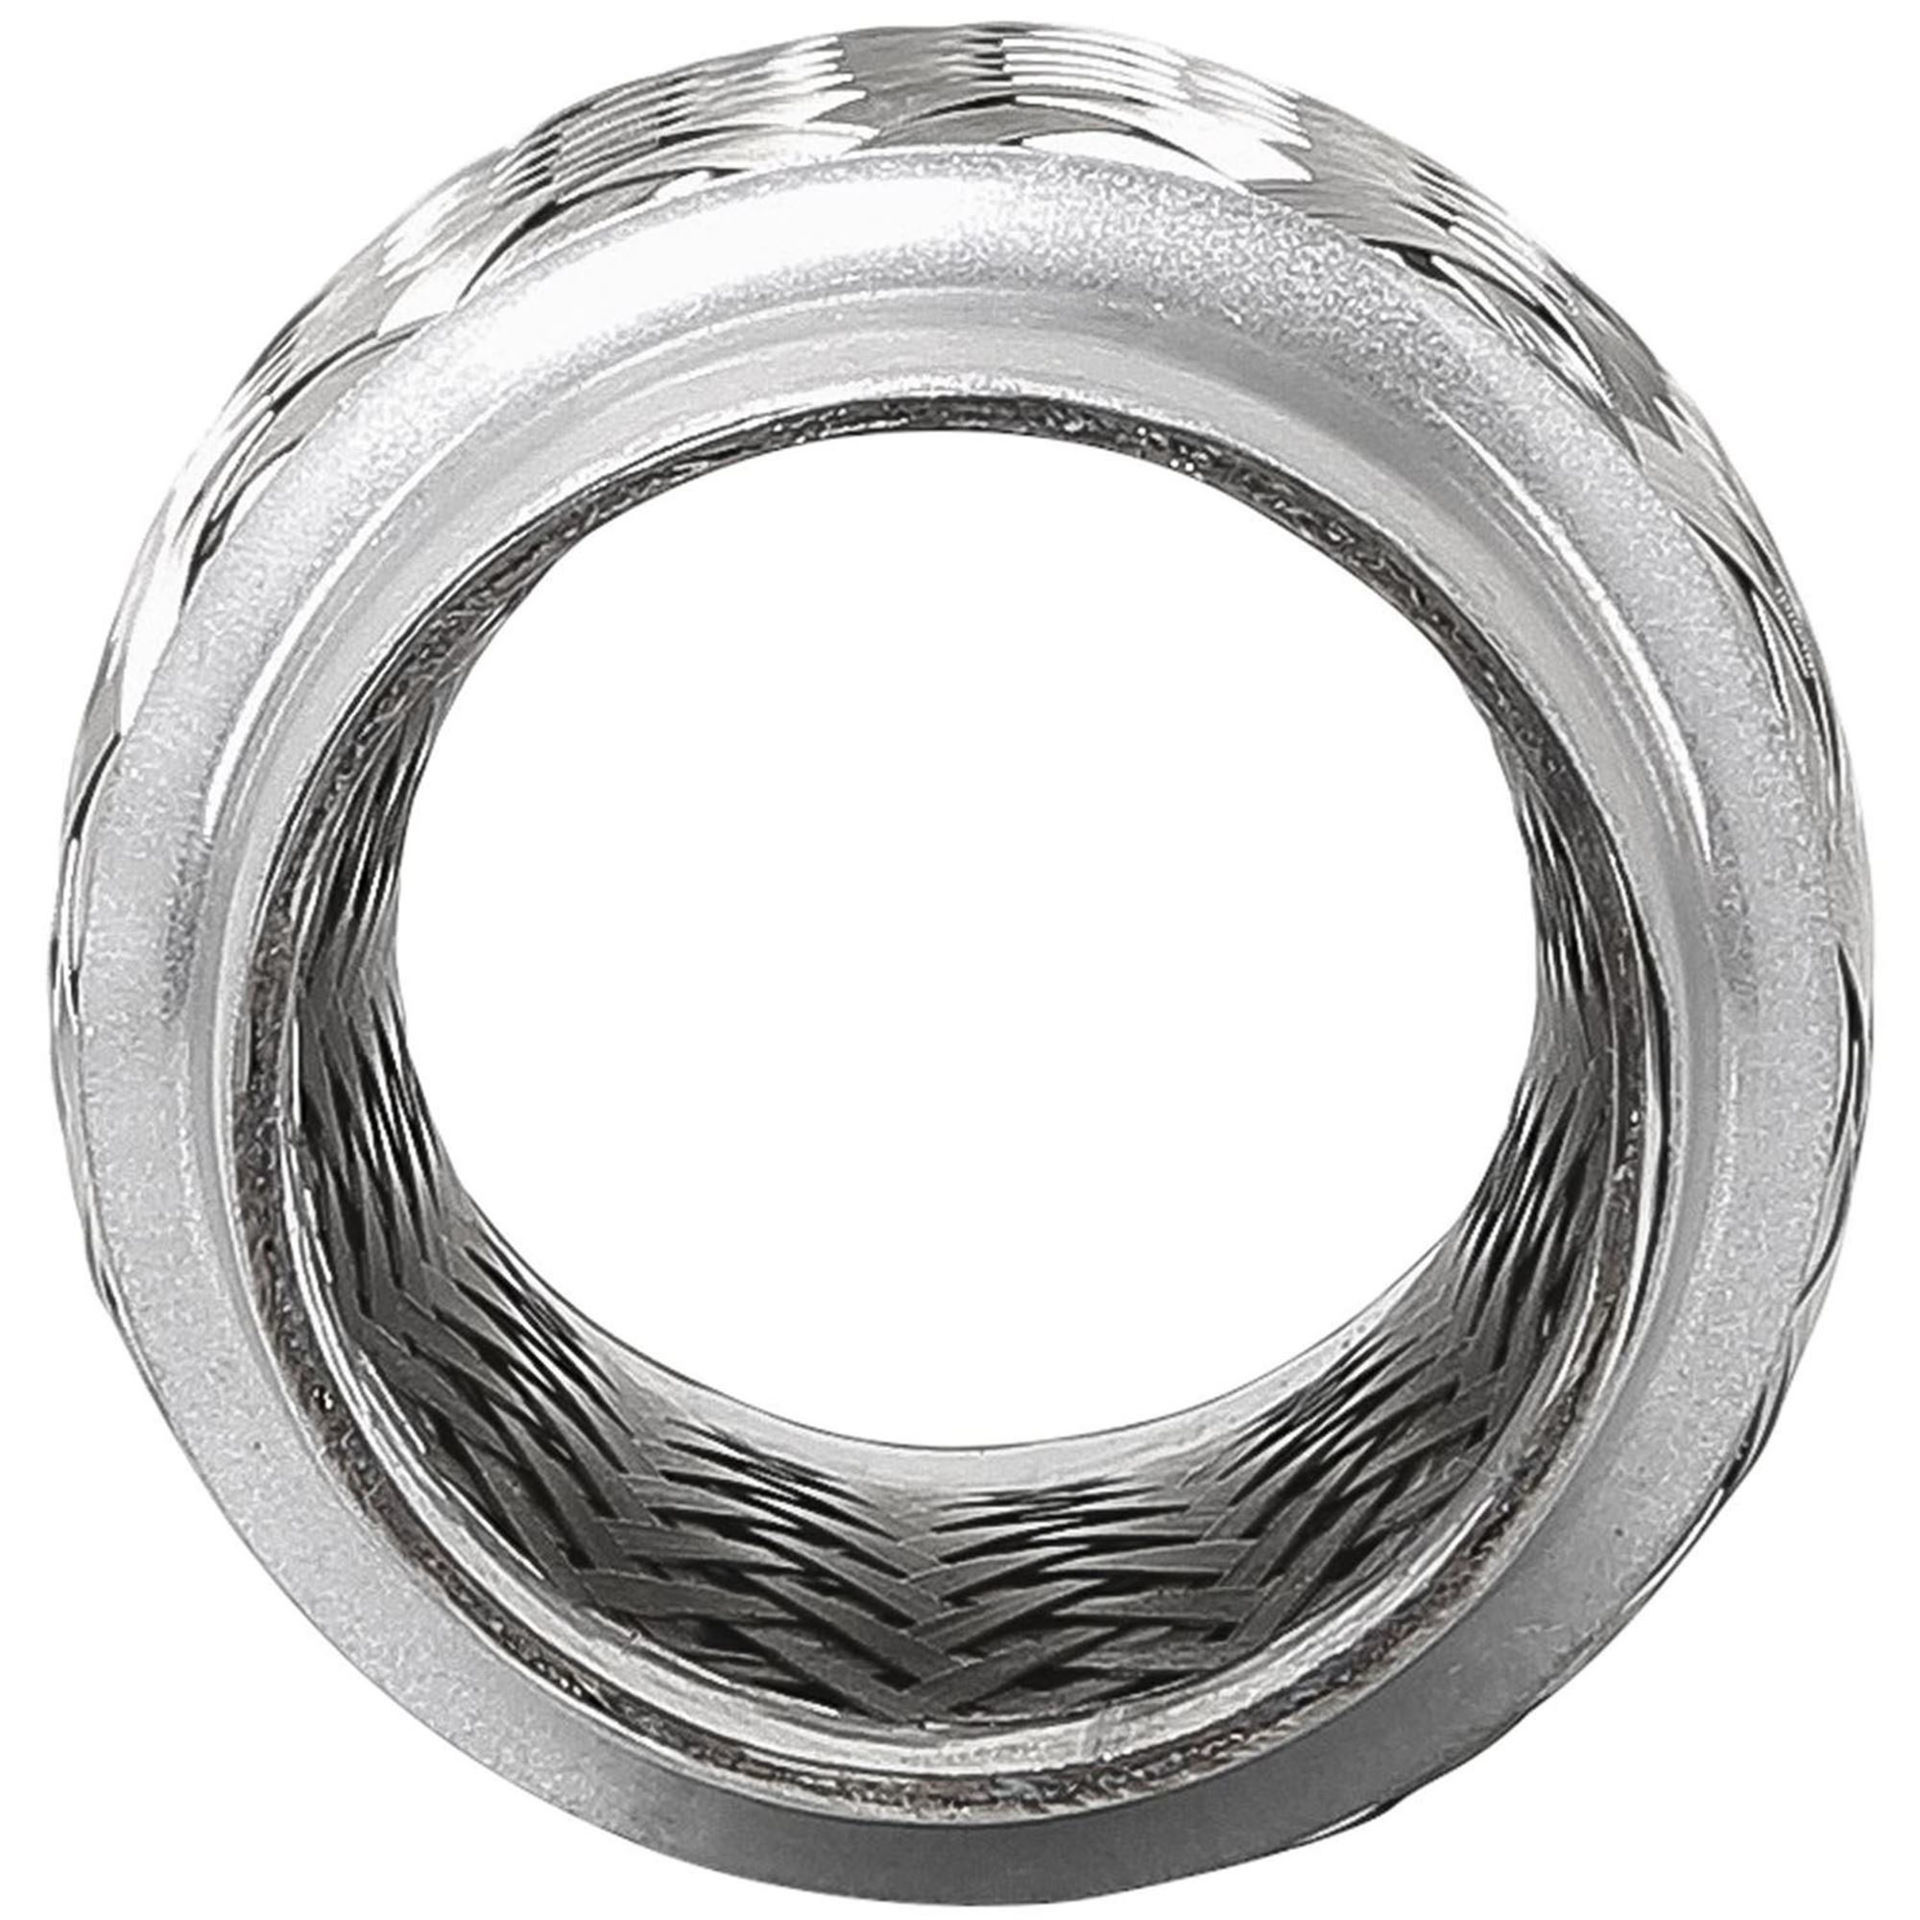 TOG 3 INCH STAINLESS STEEL FLEXIBLE PIPE EXHAUST COUPLING 76MM 3